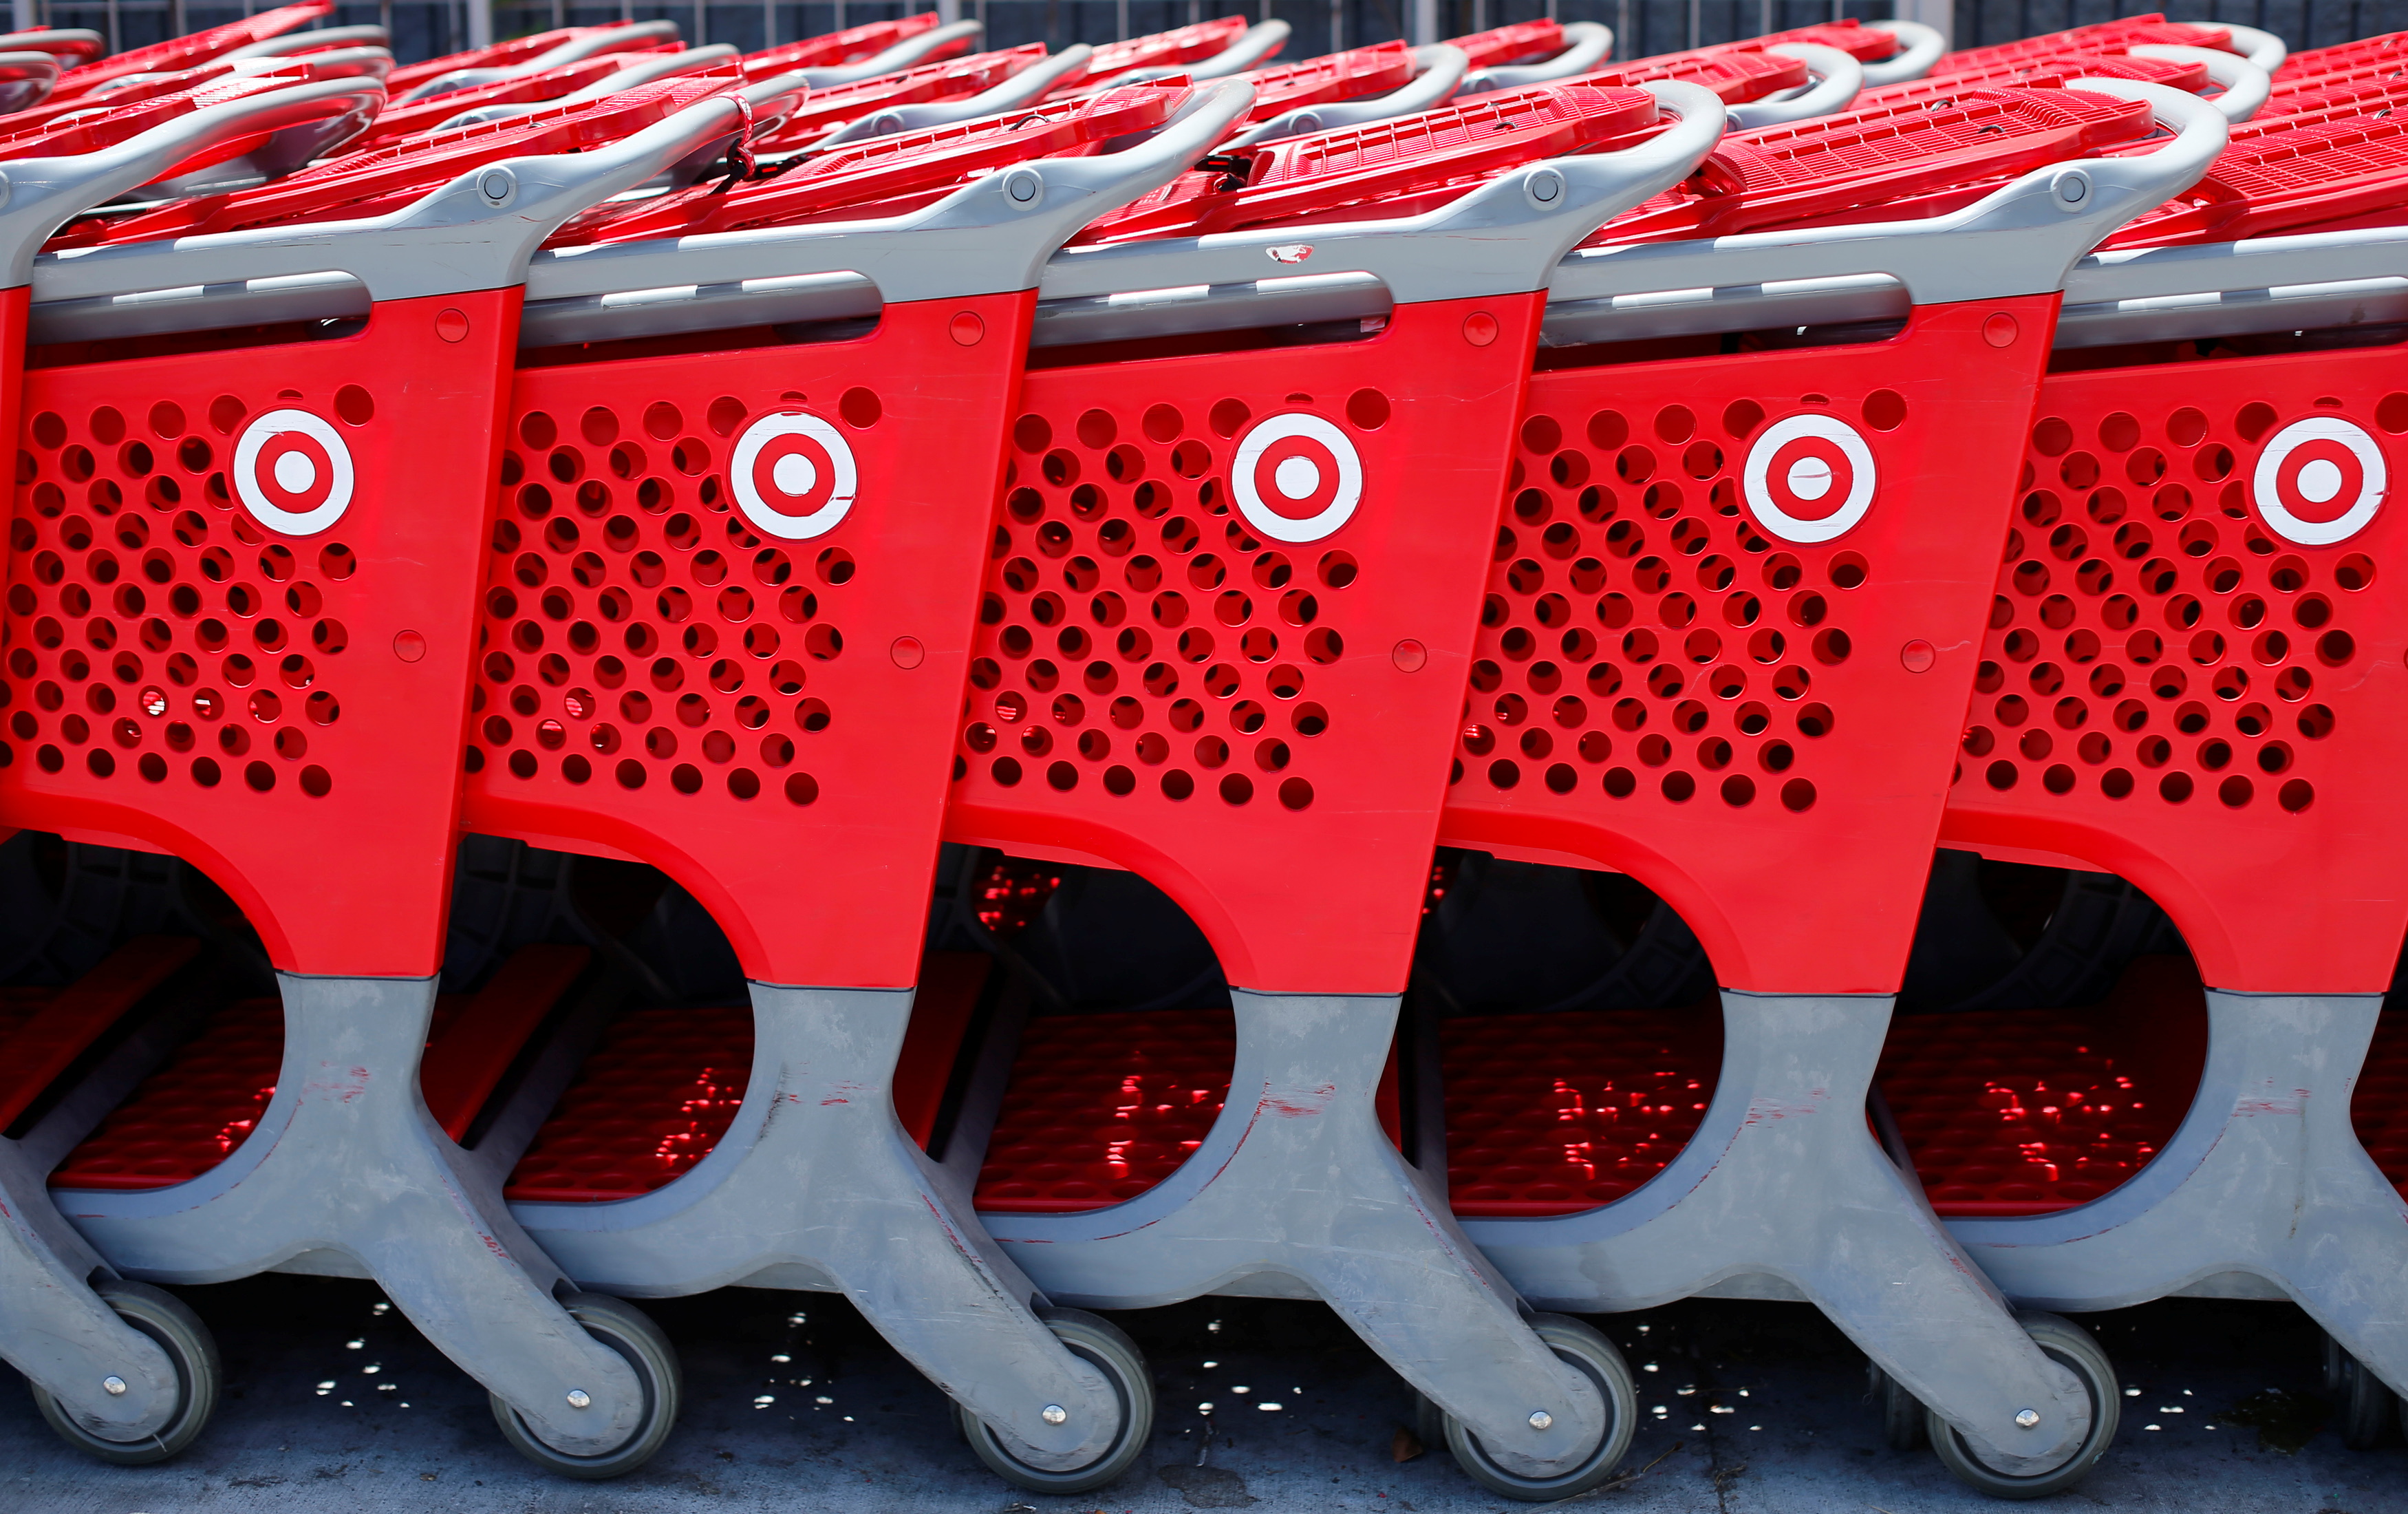 Shopping carts from a Target store are lined up in Encinitas